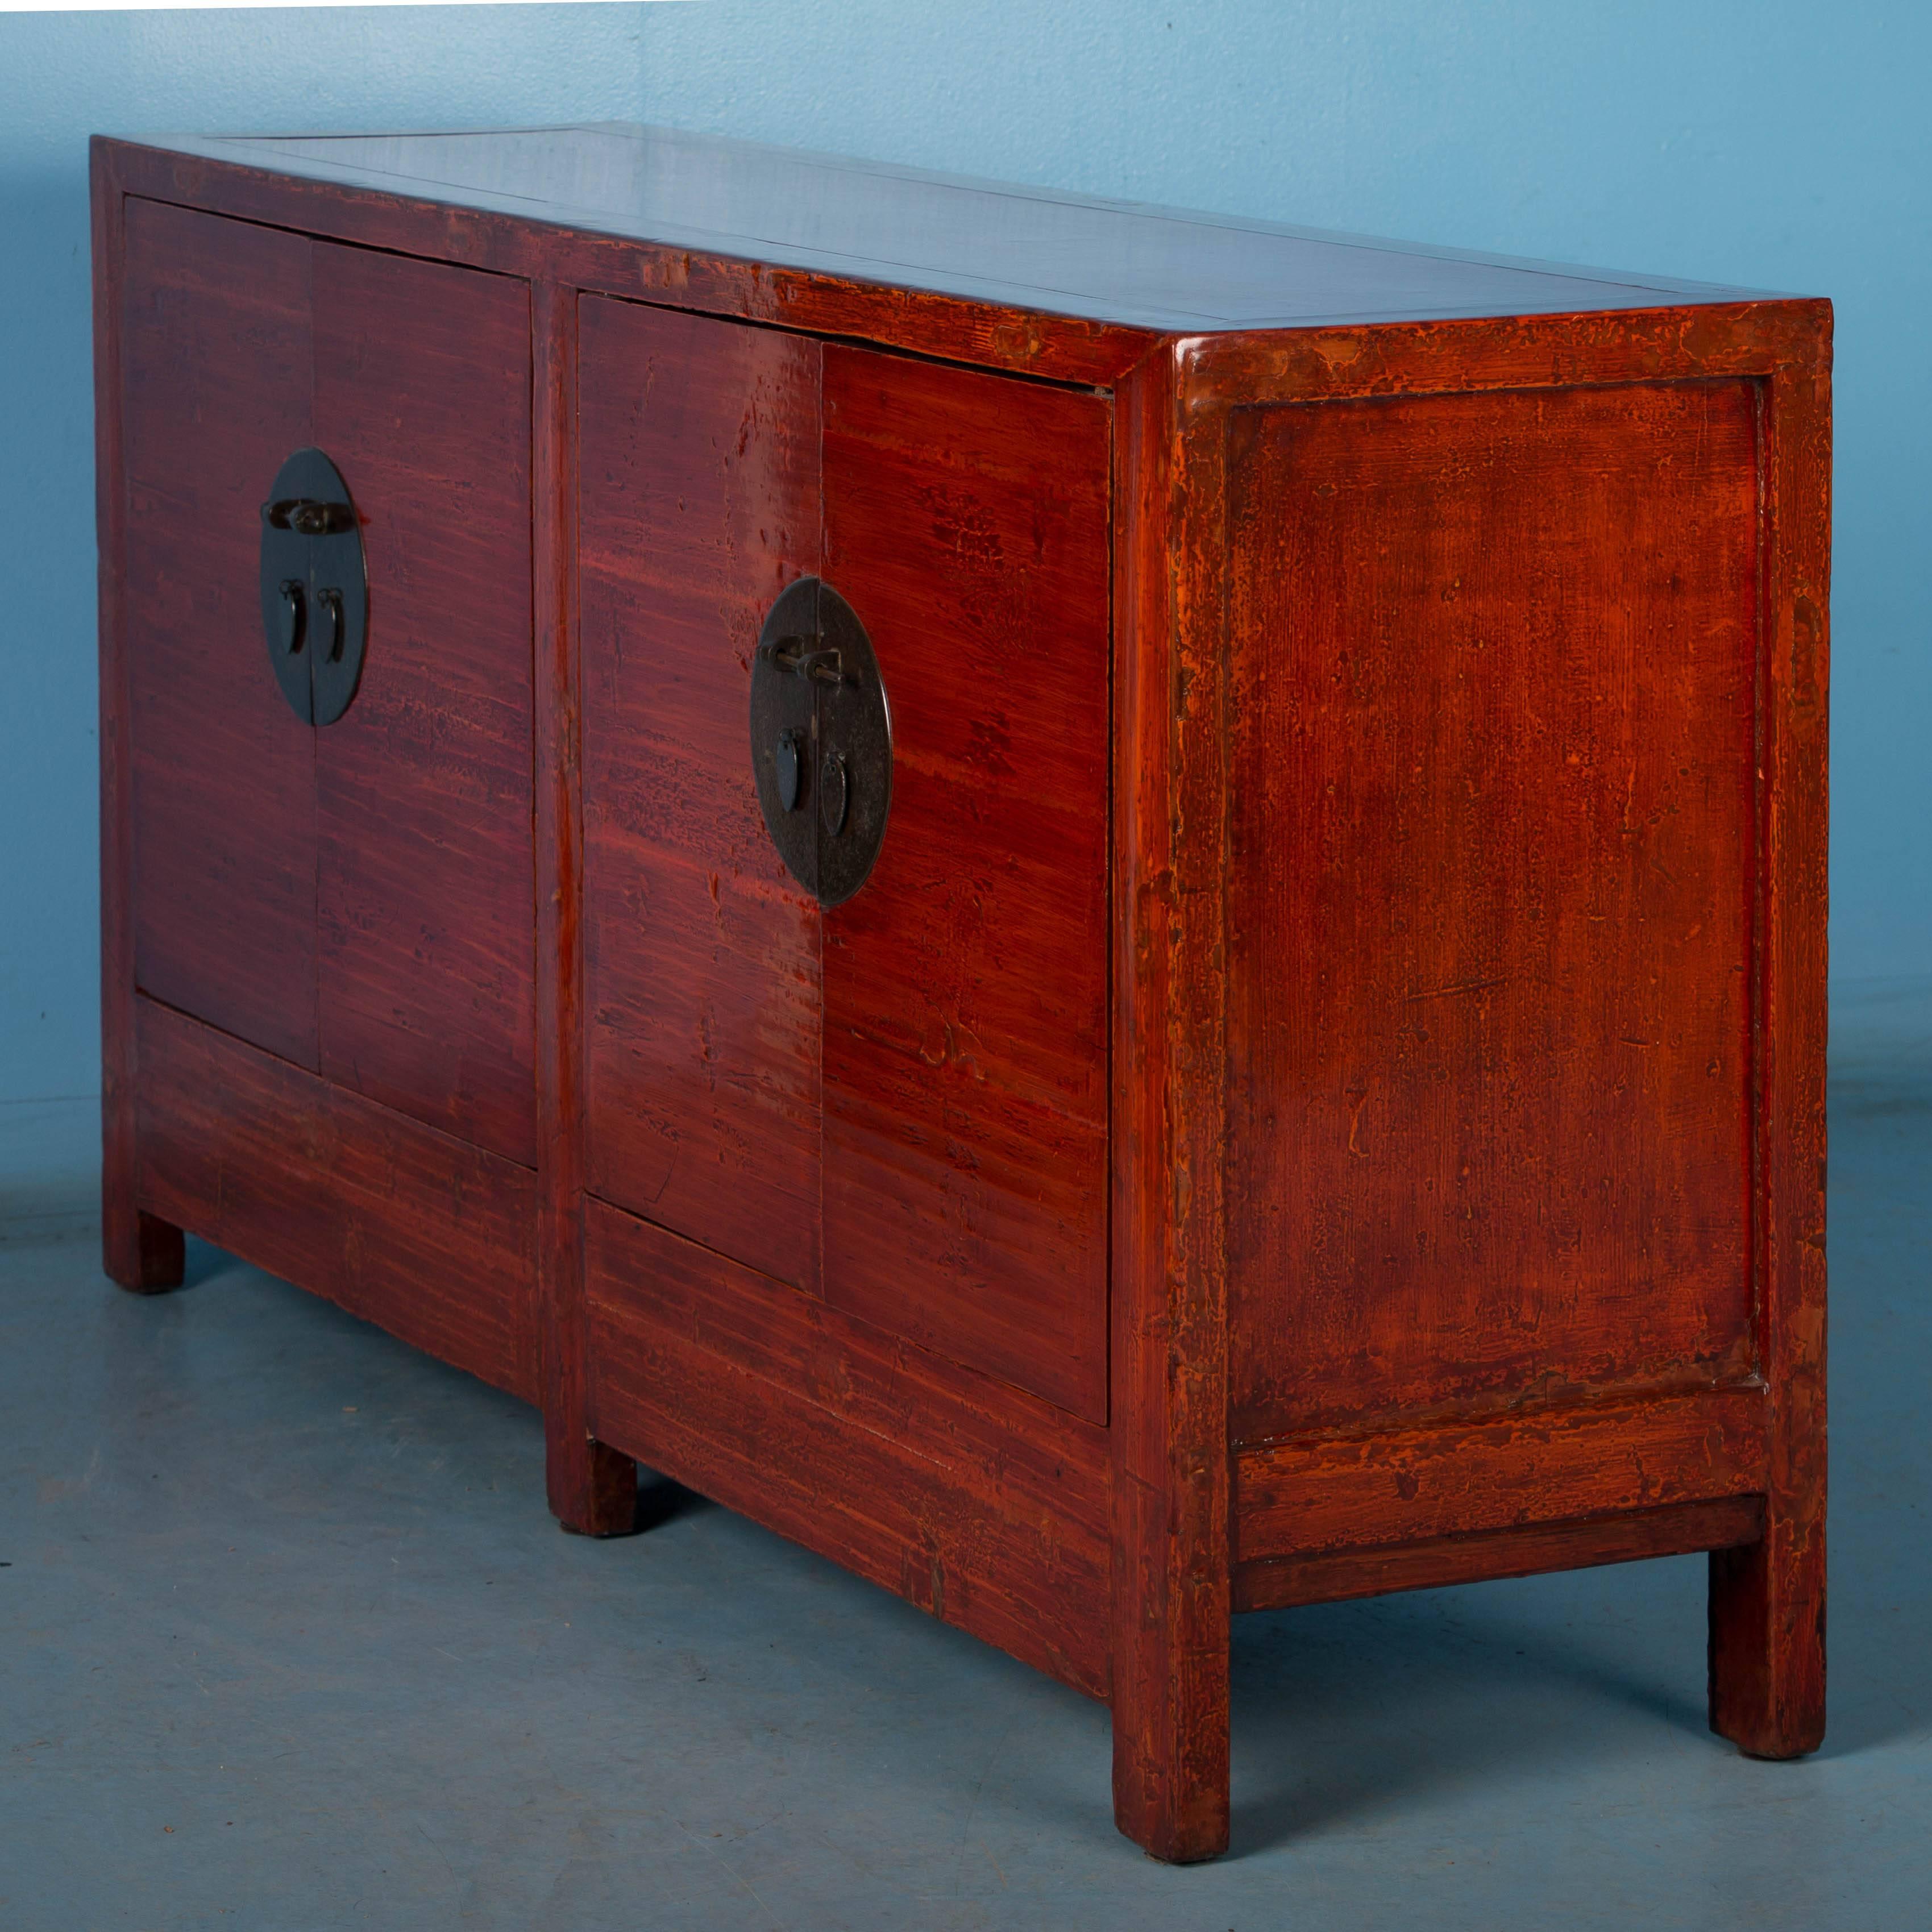 19th Century Antique Red Lacquered Chinese Sideboard Cabinet